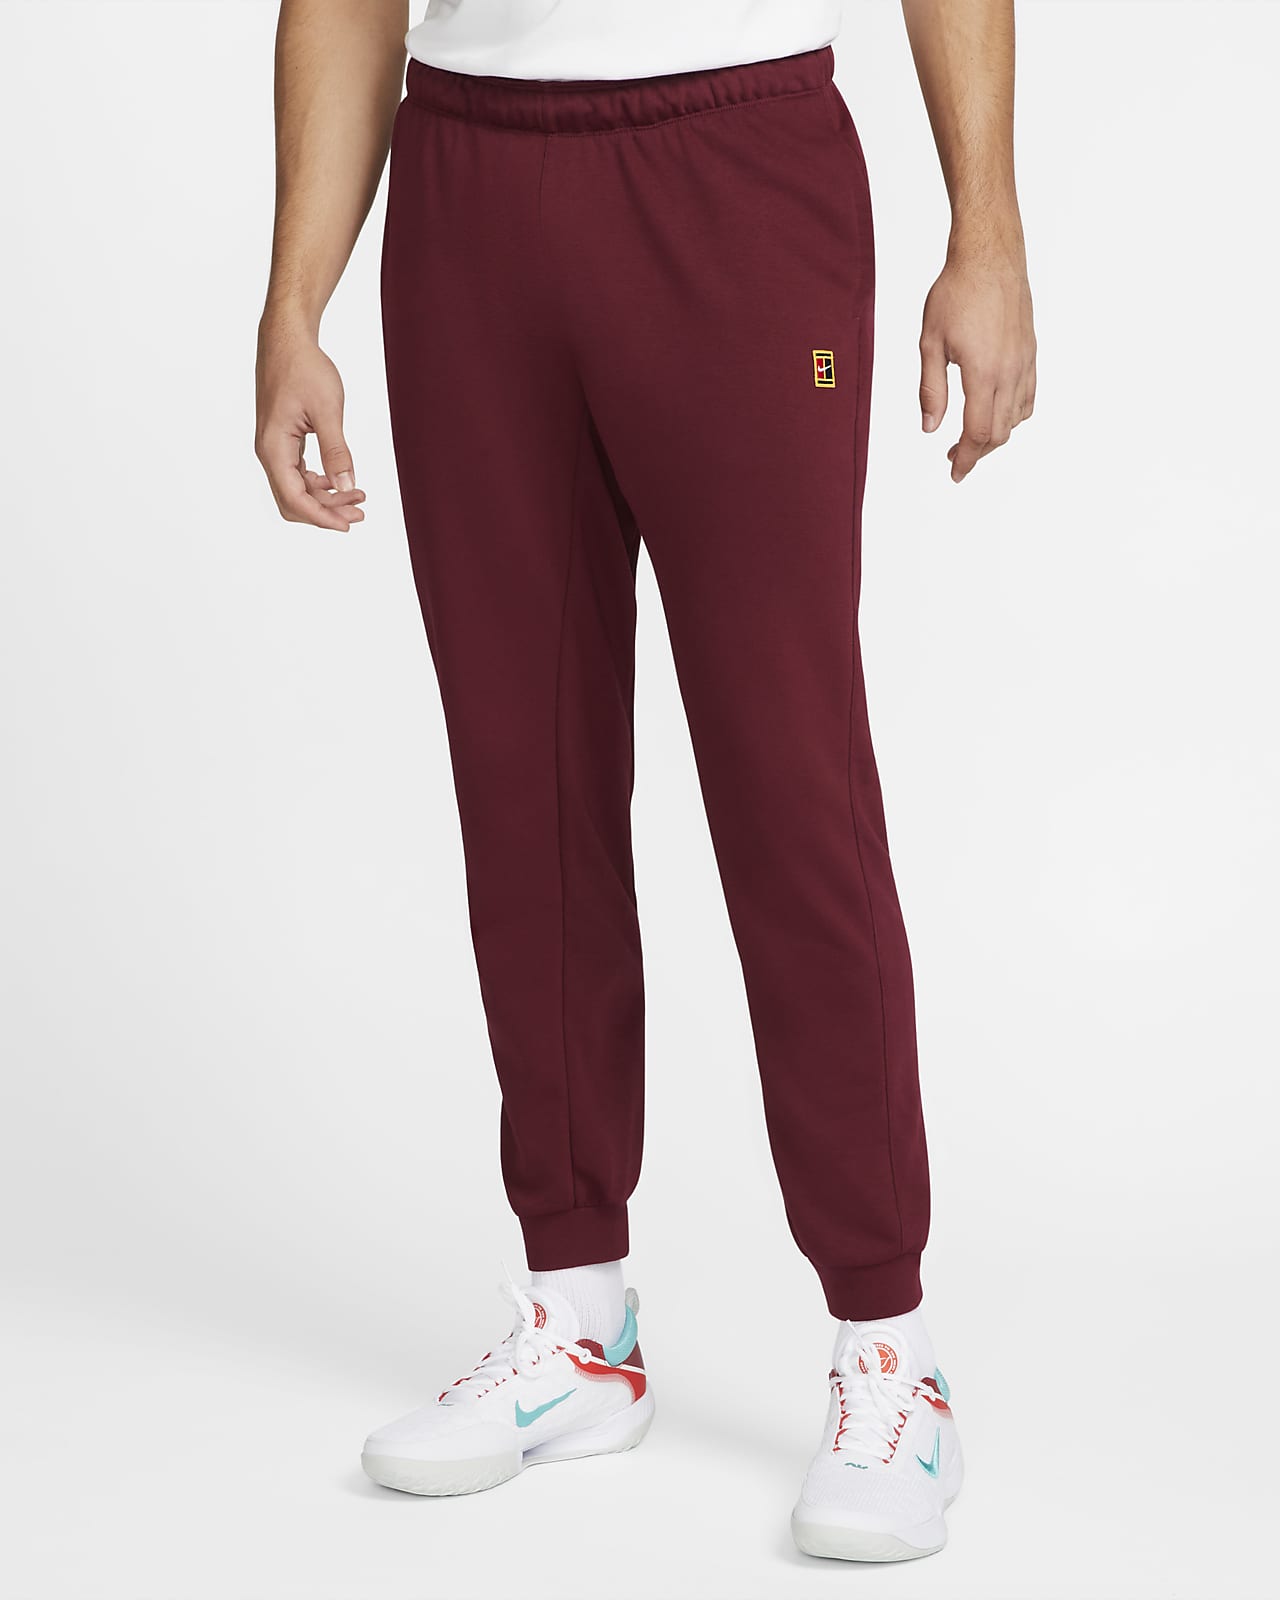 NikeCourt Heritage Men's French Terry Tennis Trousers